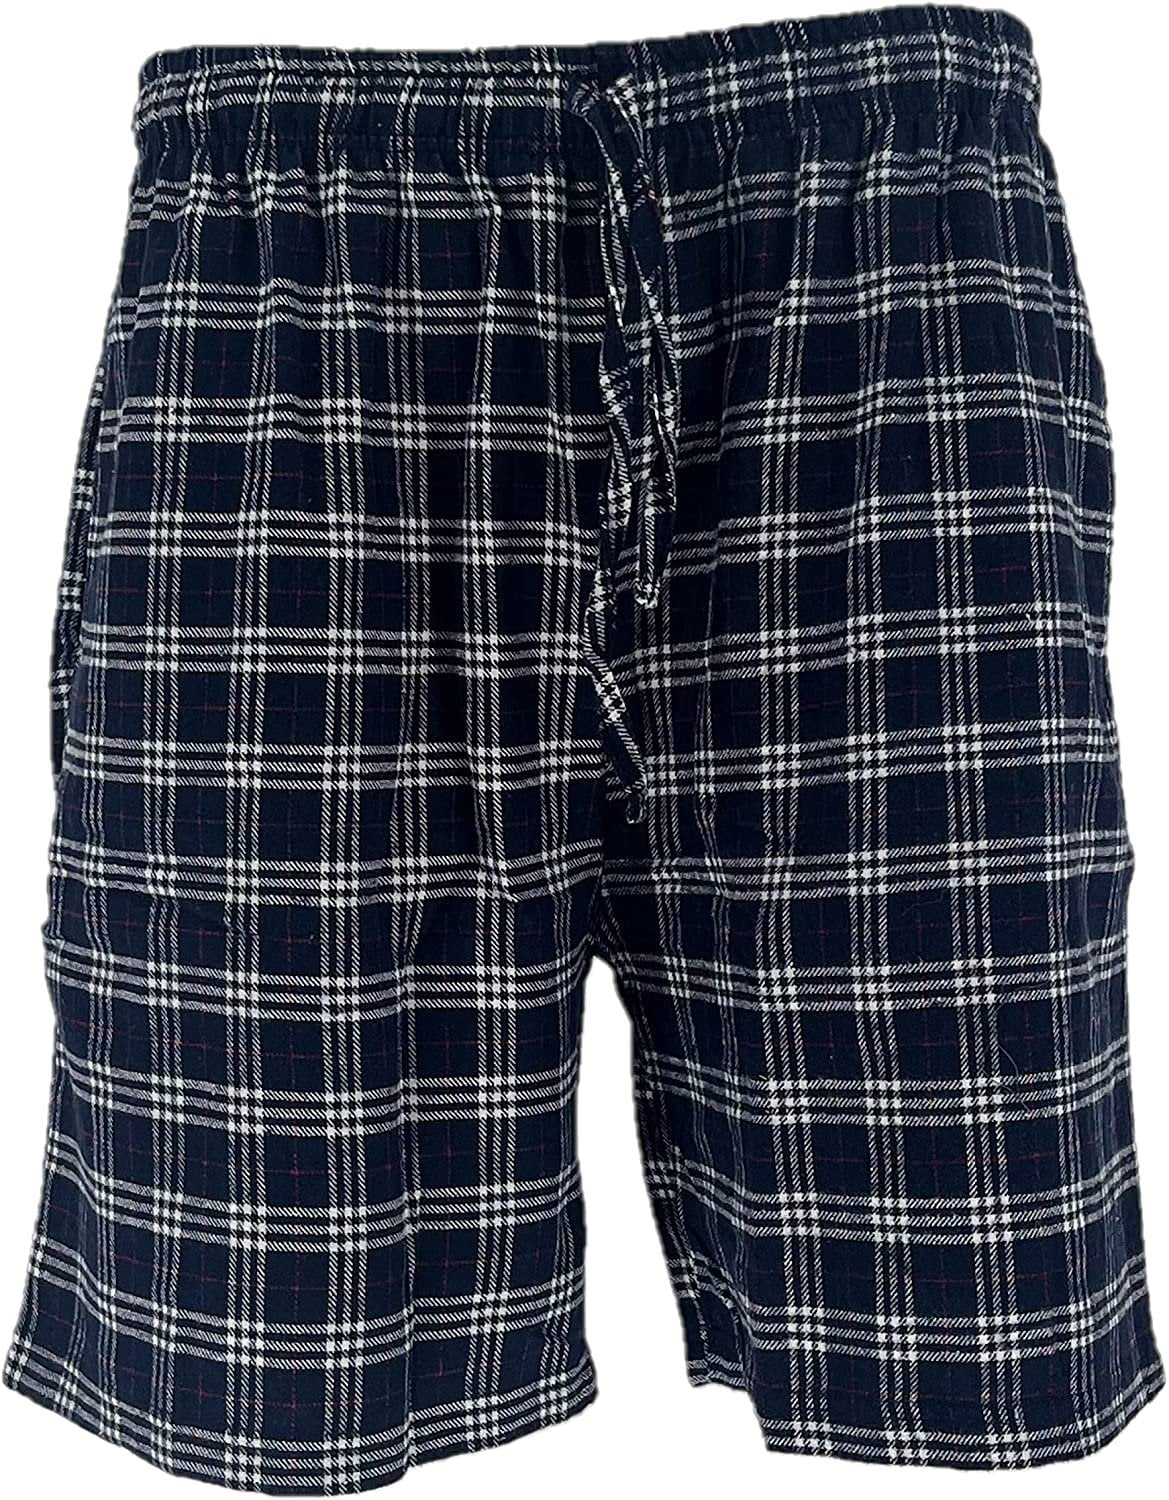 Men's Flannel Pajama Shorts - Super Soft Cotton Plaid Shorts with Pockets  and Drawstrings - Sleep and Lounge Design 5, Large 